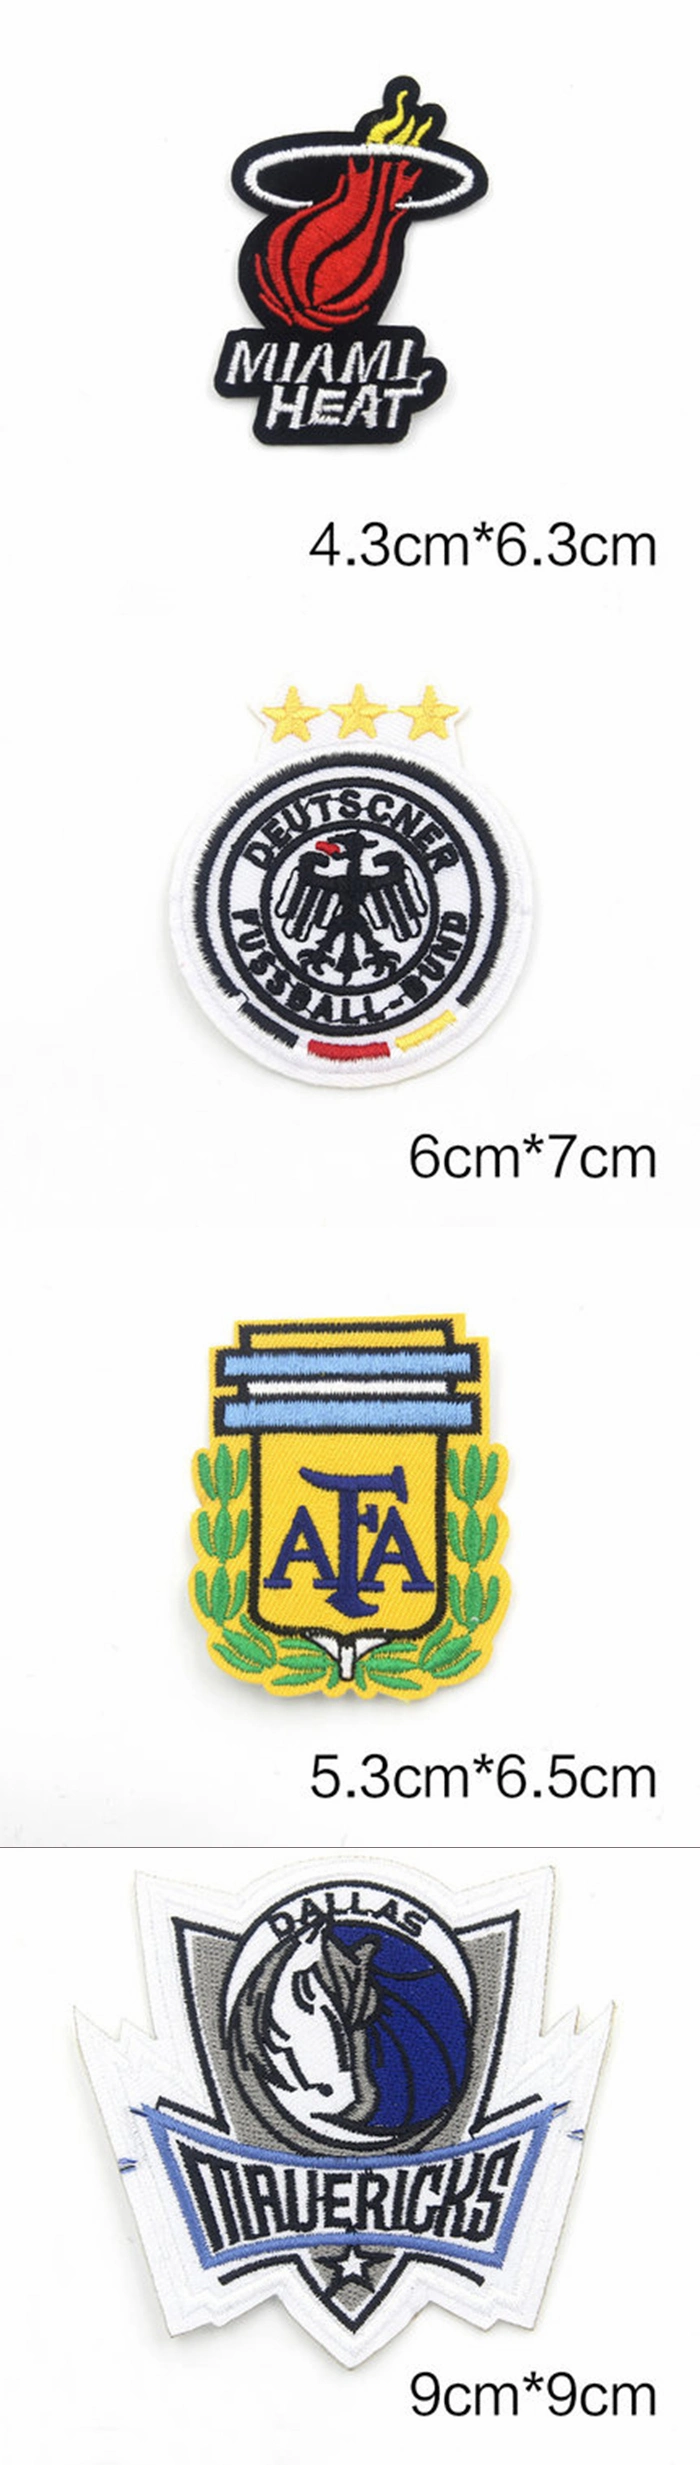 Customized Embroidery Badges for Team Clubs, Costumes and Hats, etc